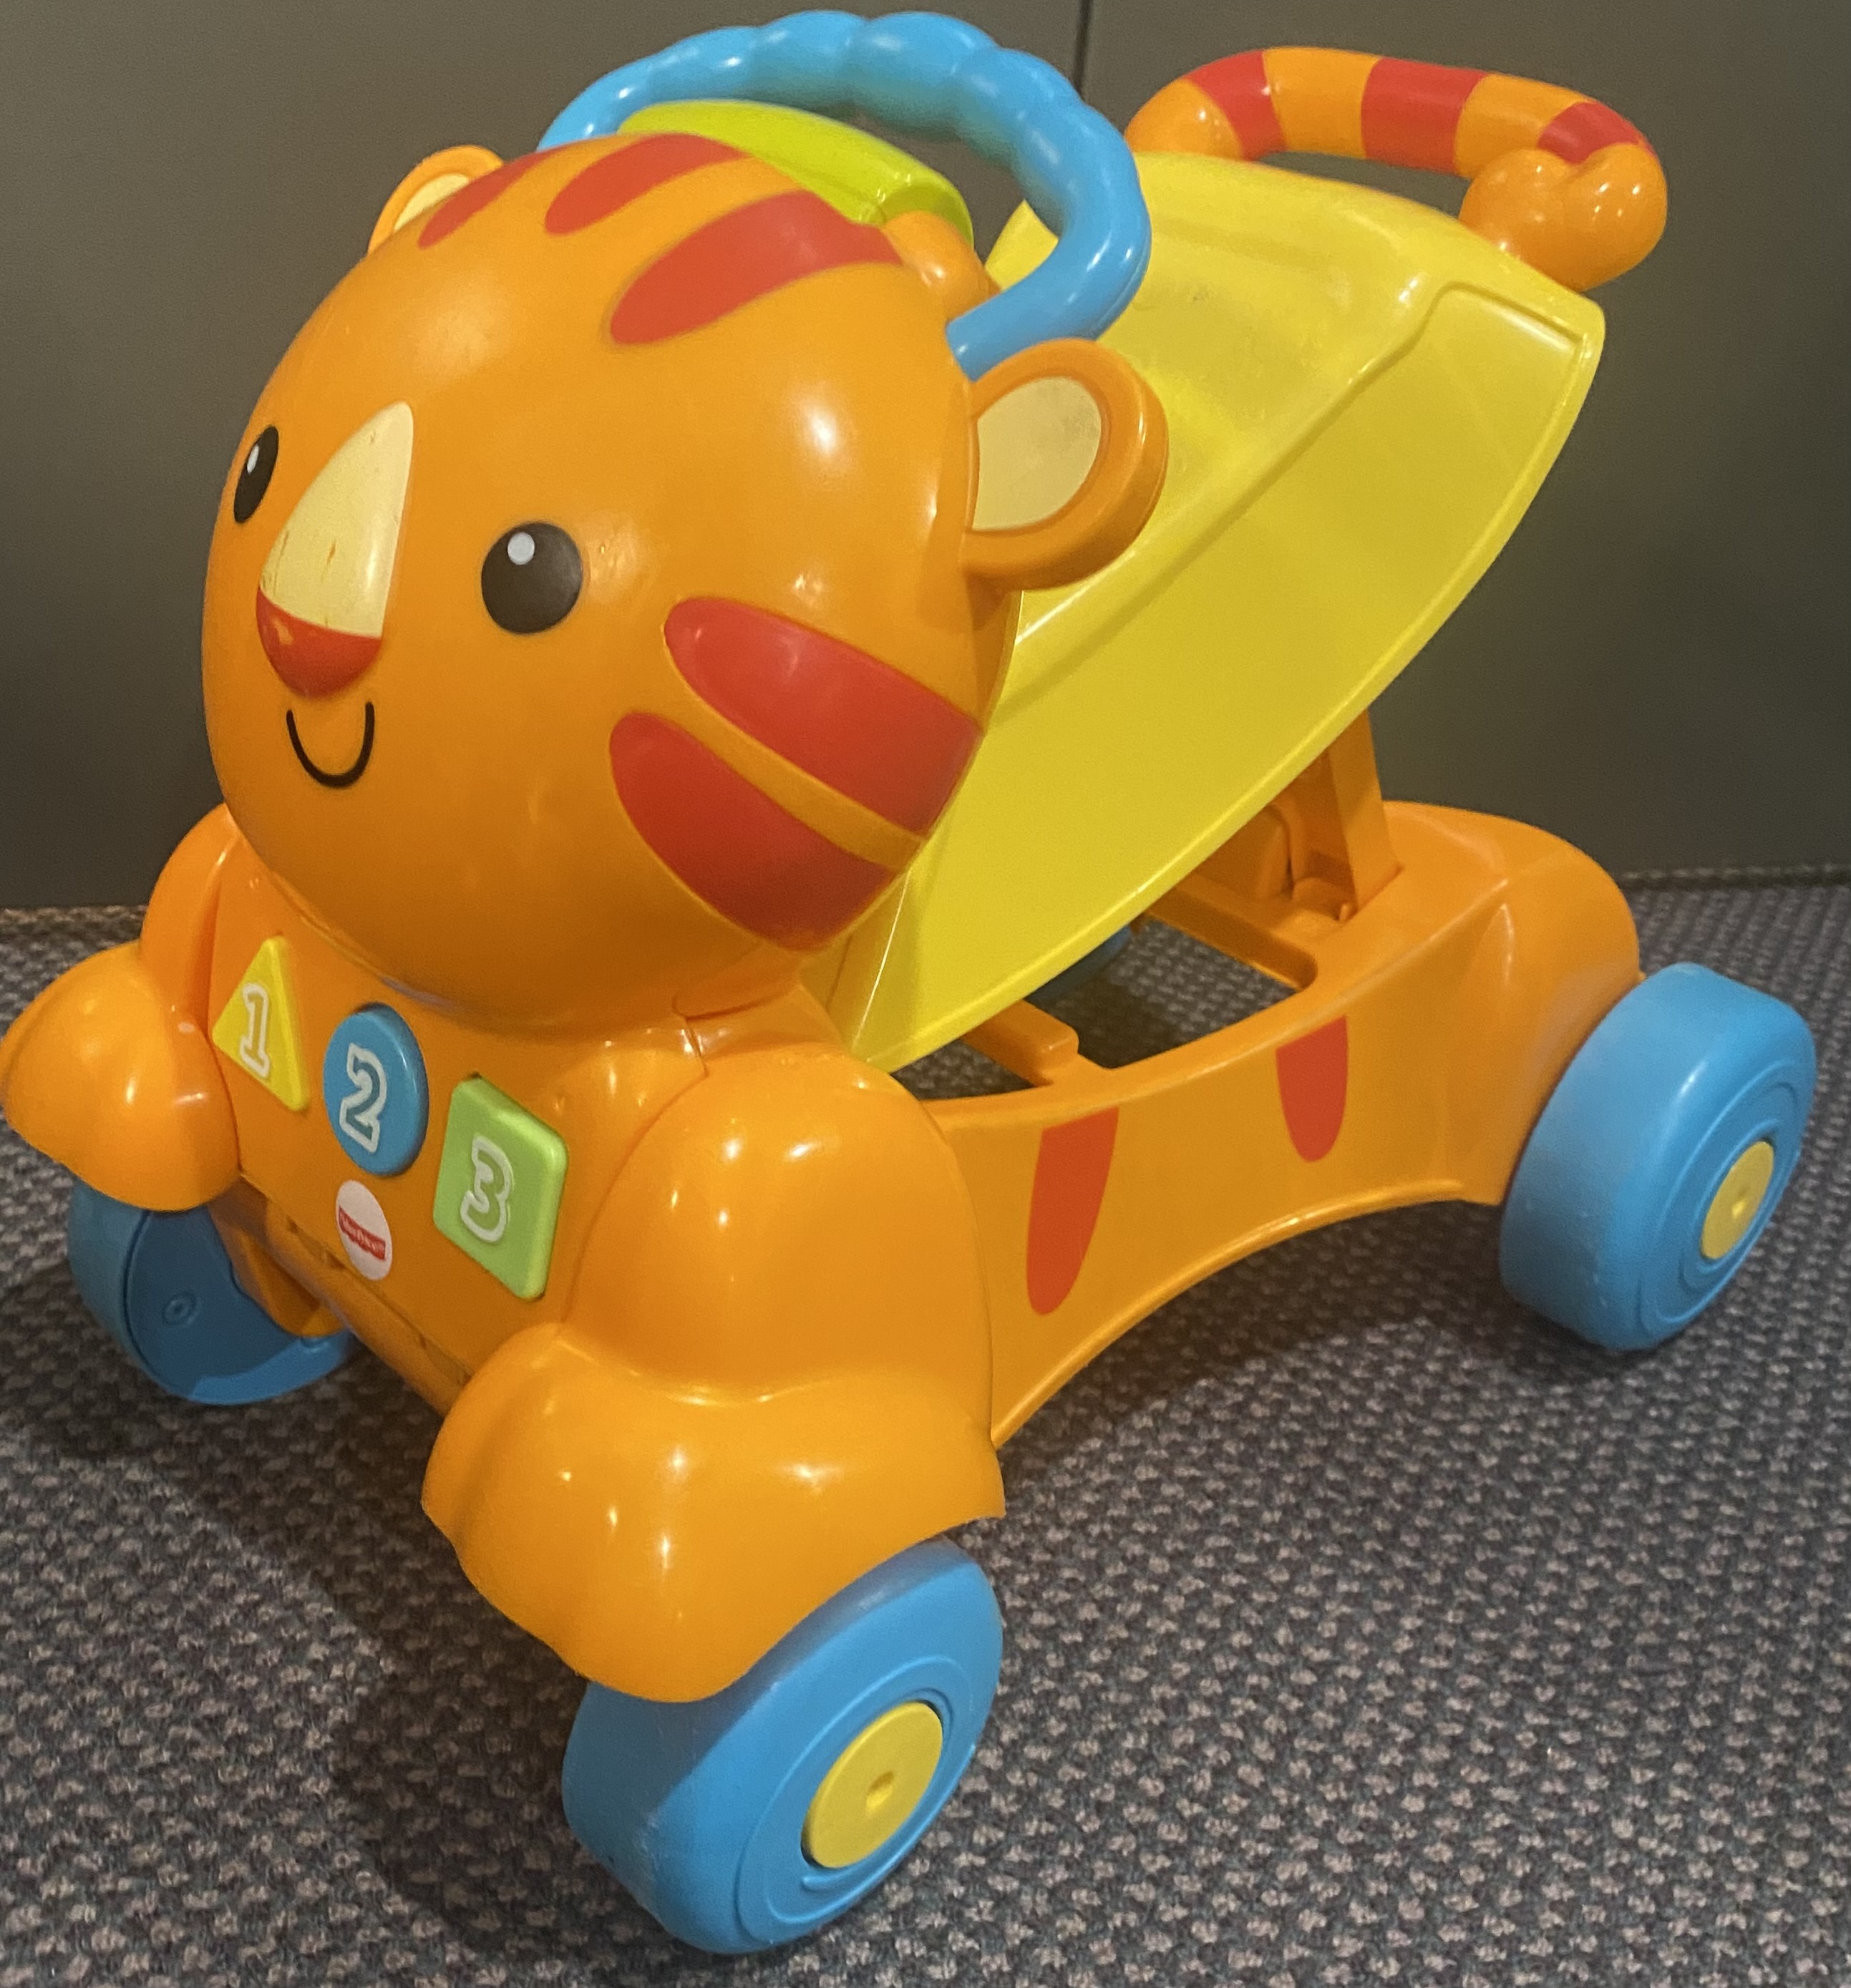 Fisher Price Ride On Lion